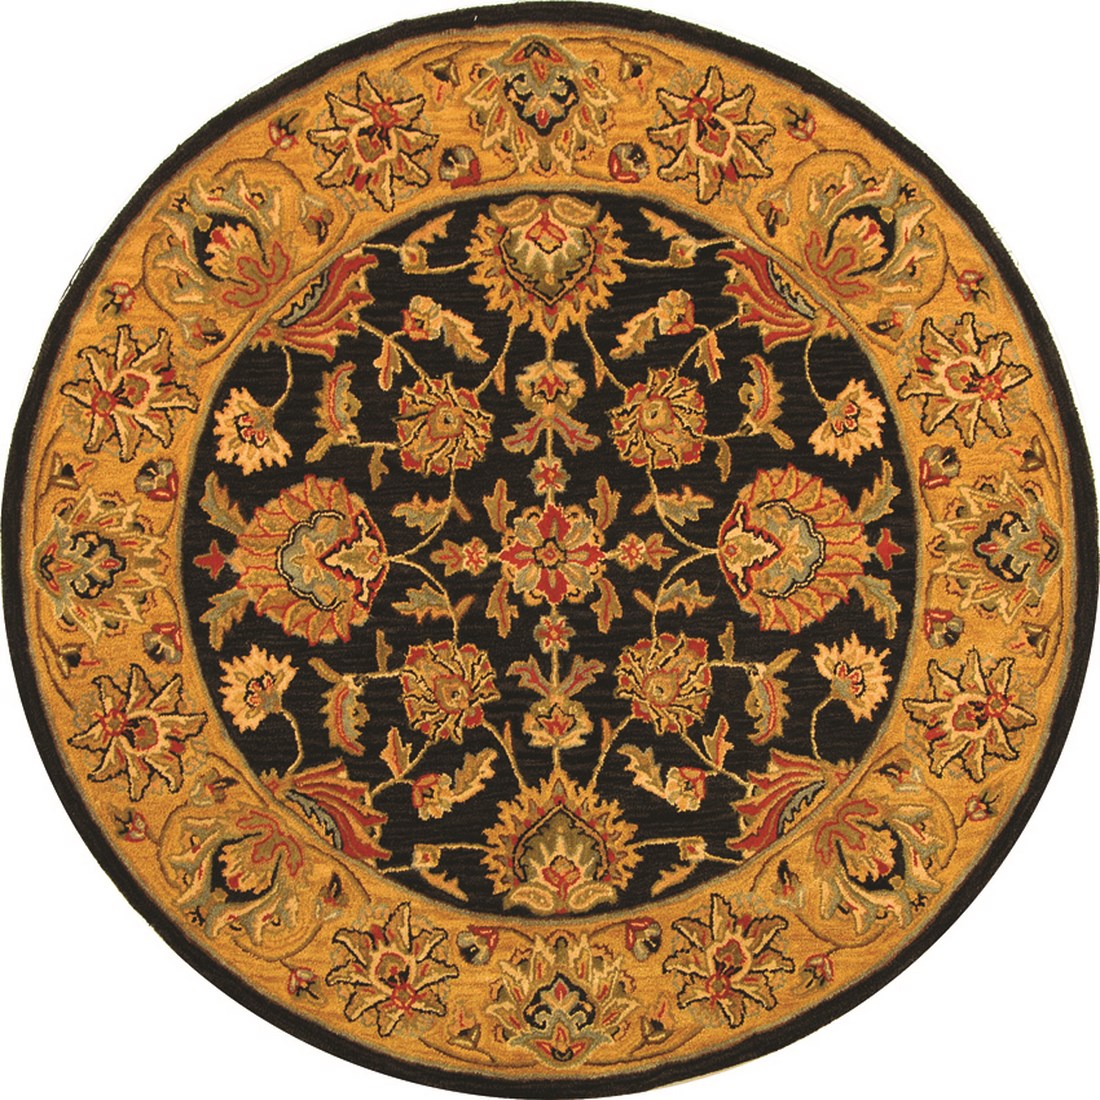 SAFAVIEH Heritage Regis Traditional Wool Area Rug, Charcoal/Gold, 6' x 6' Round - image 1 of 4